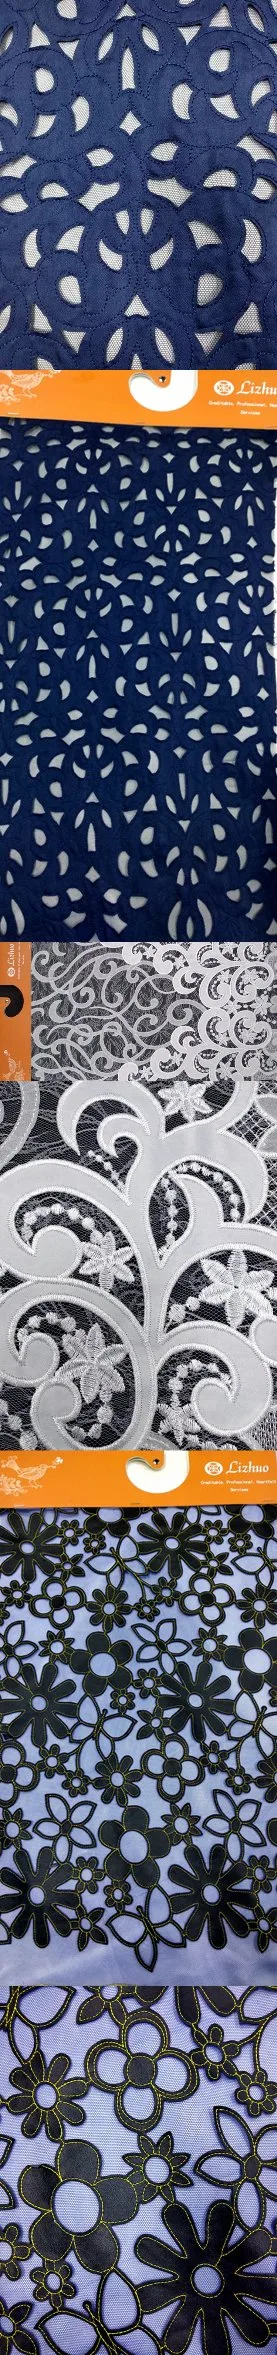 3D Embroidery Lace Fabric Applique Flower Tulle Fabric Lace Laser Cut Embroidery Chemicallace Fabric for Garment Accessory